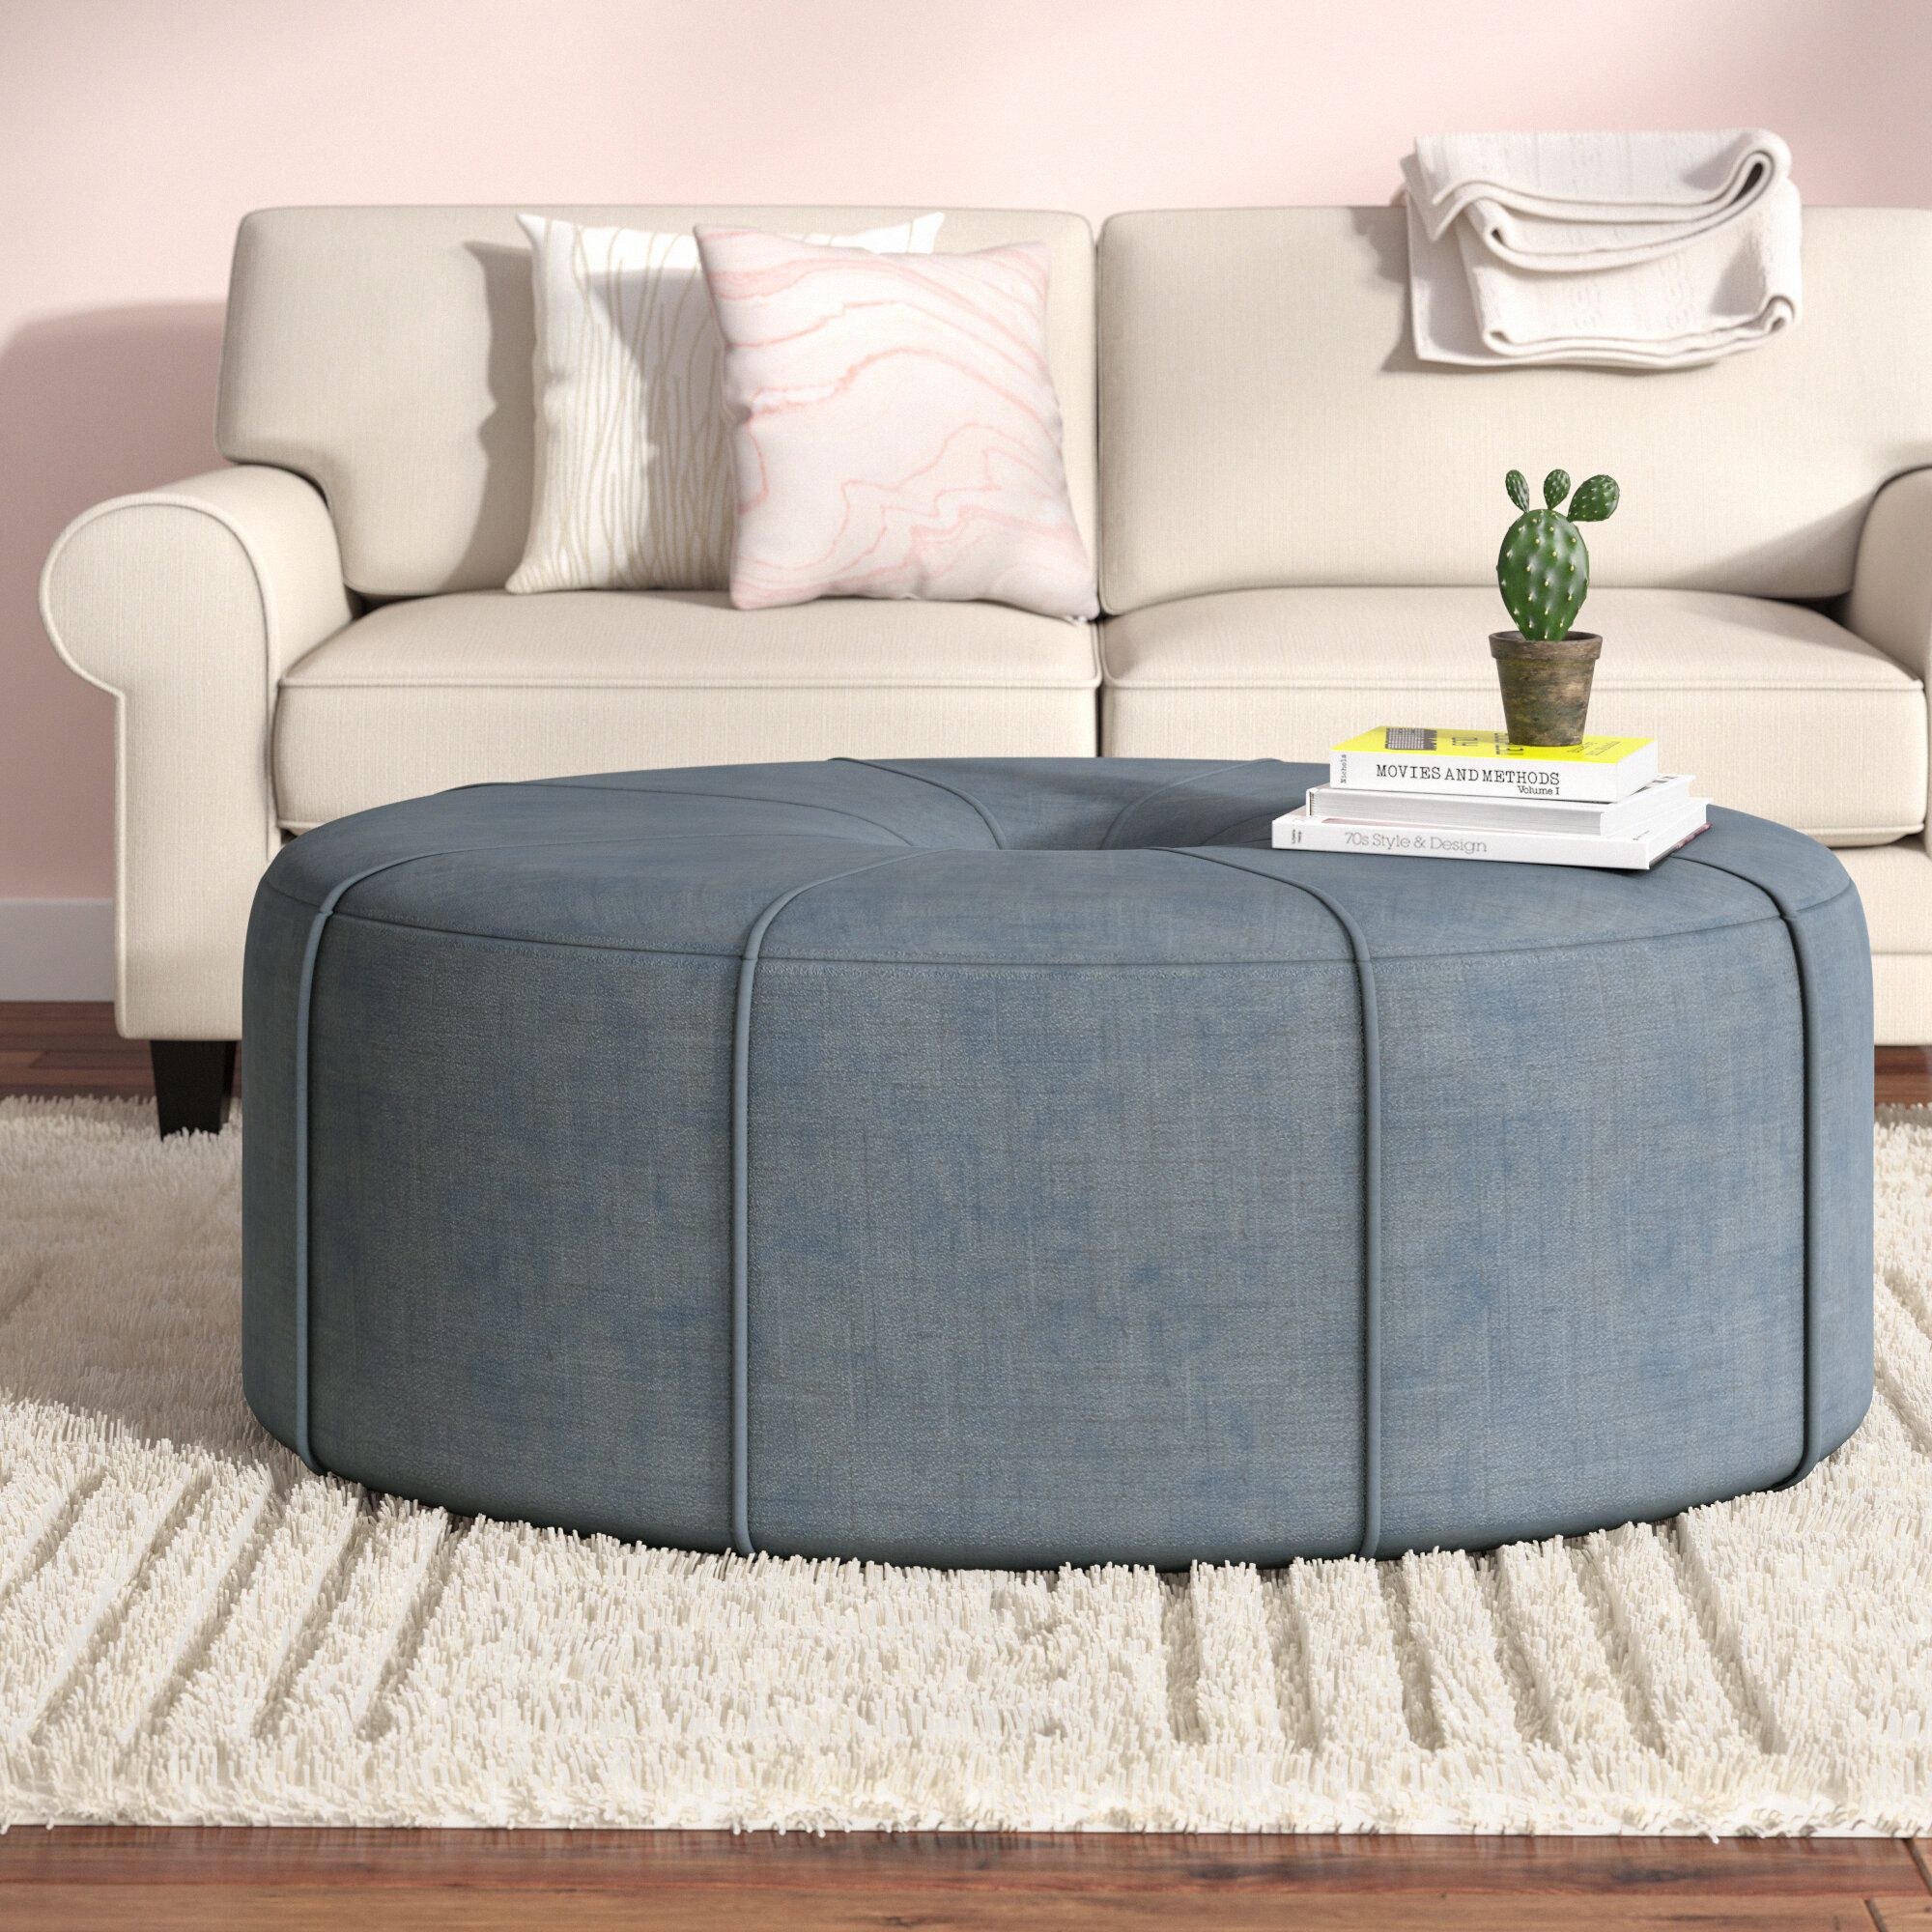 Oval Tufted Ottoman Coffee Table : Round Grey Fabric Tufted Coffee Inside Gray Fabric Oval Ottomans (View 7 of 20)